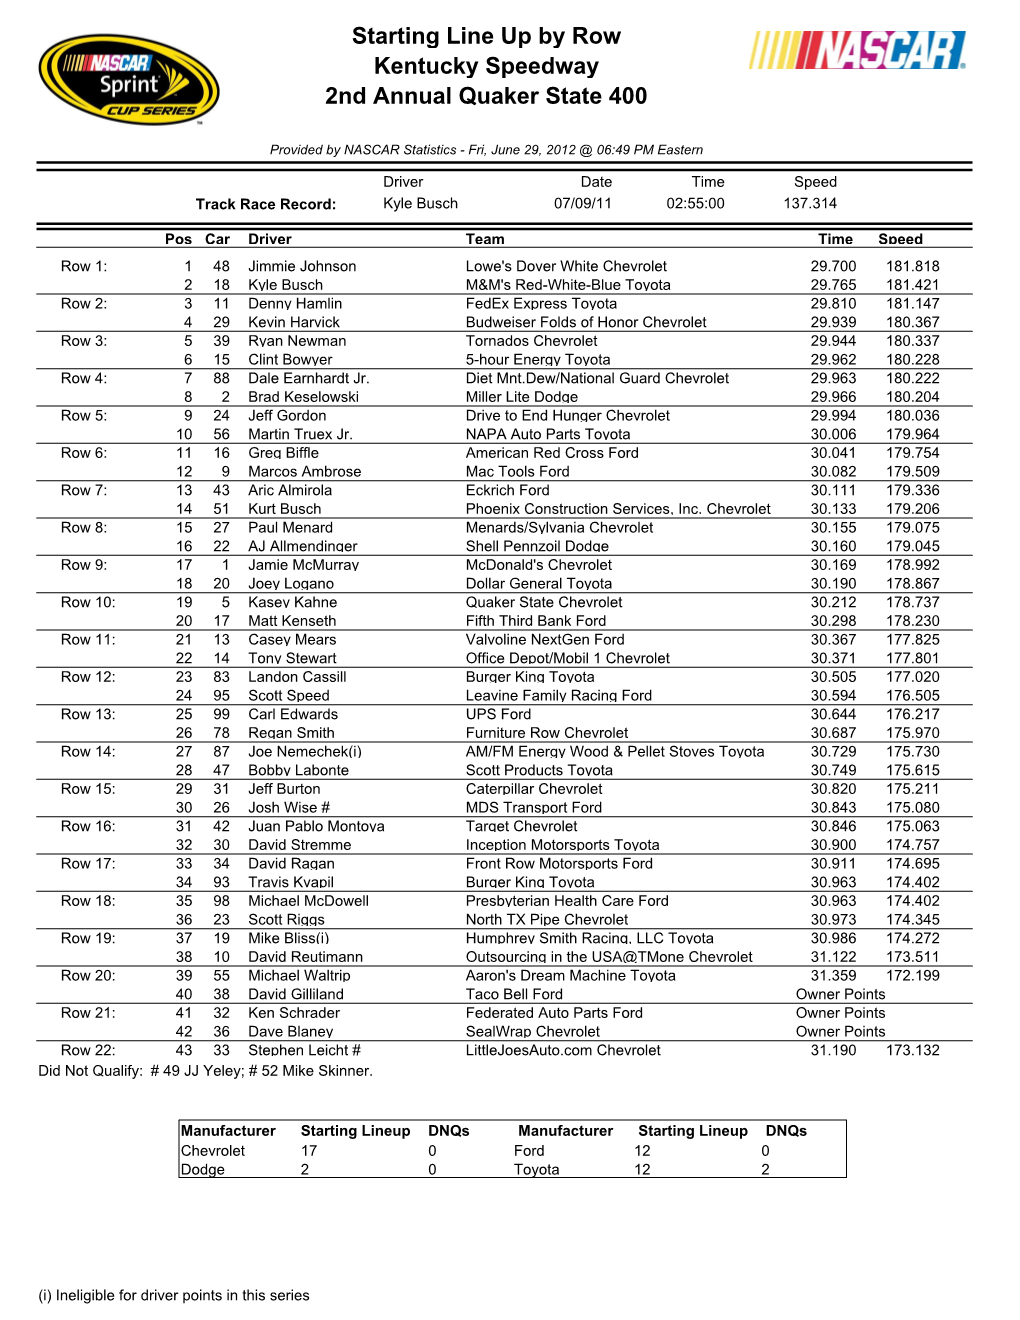 Starting Line up by Row Kentucky Speedway 2Nd Annual Quaker State 400